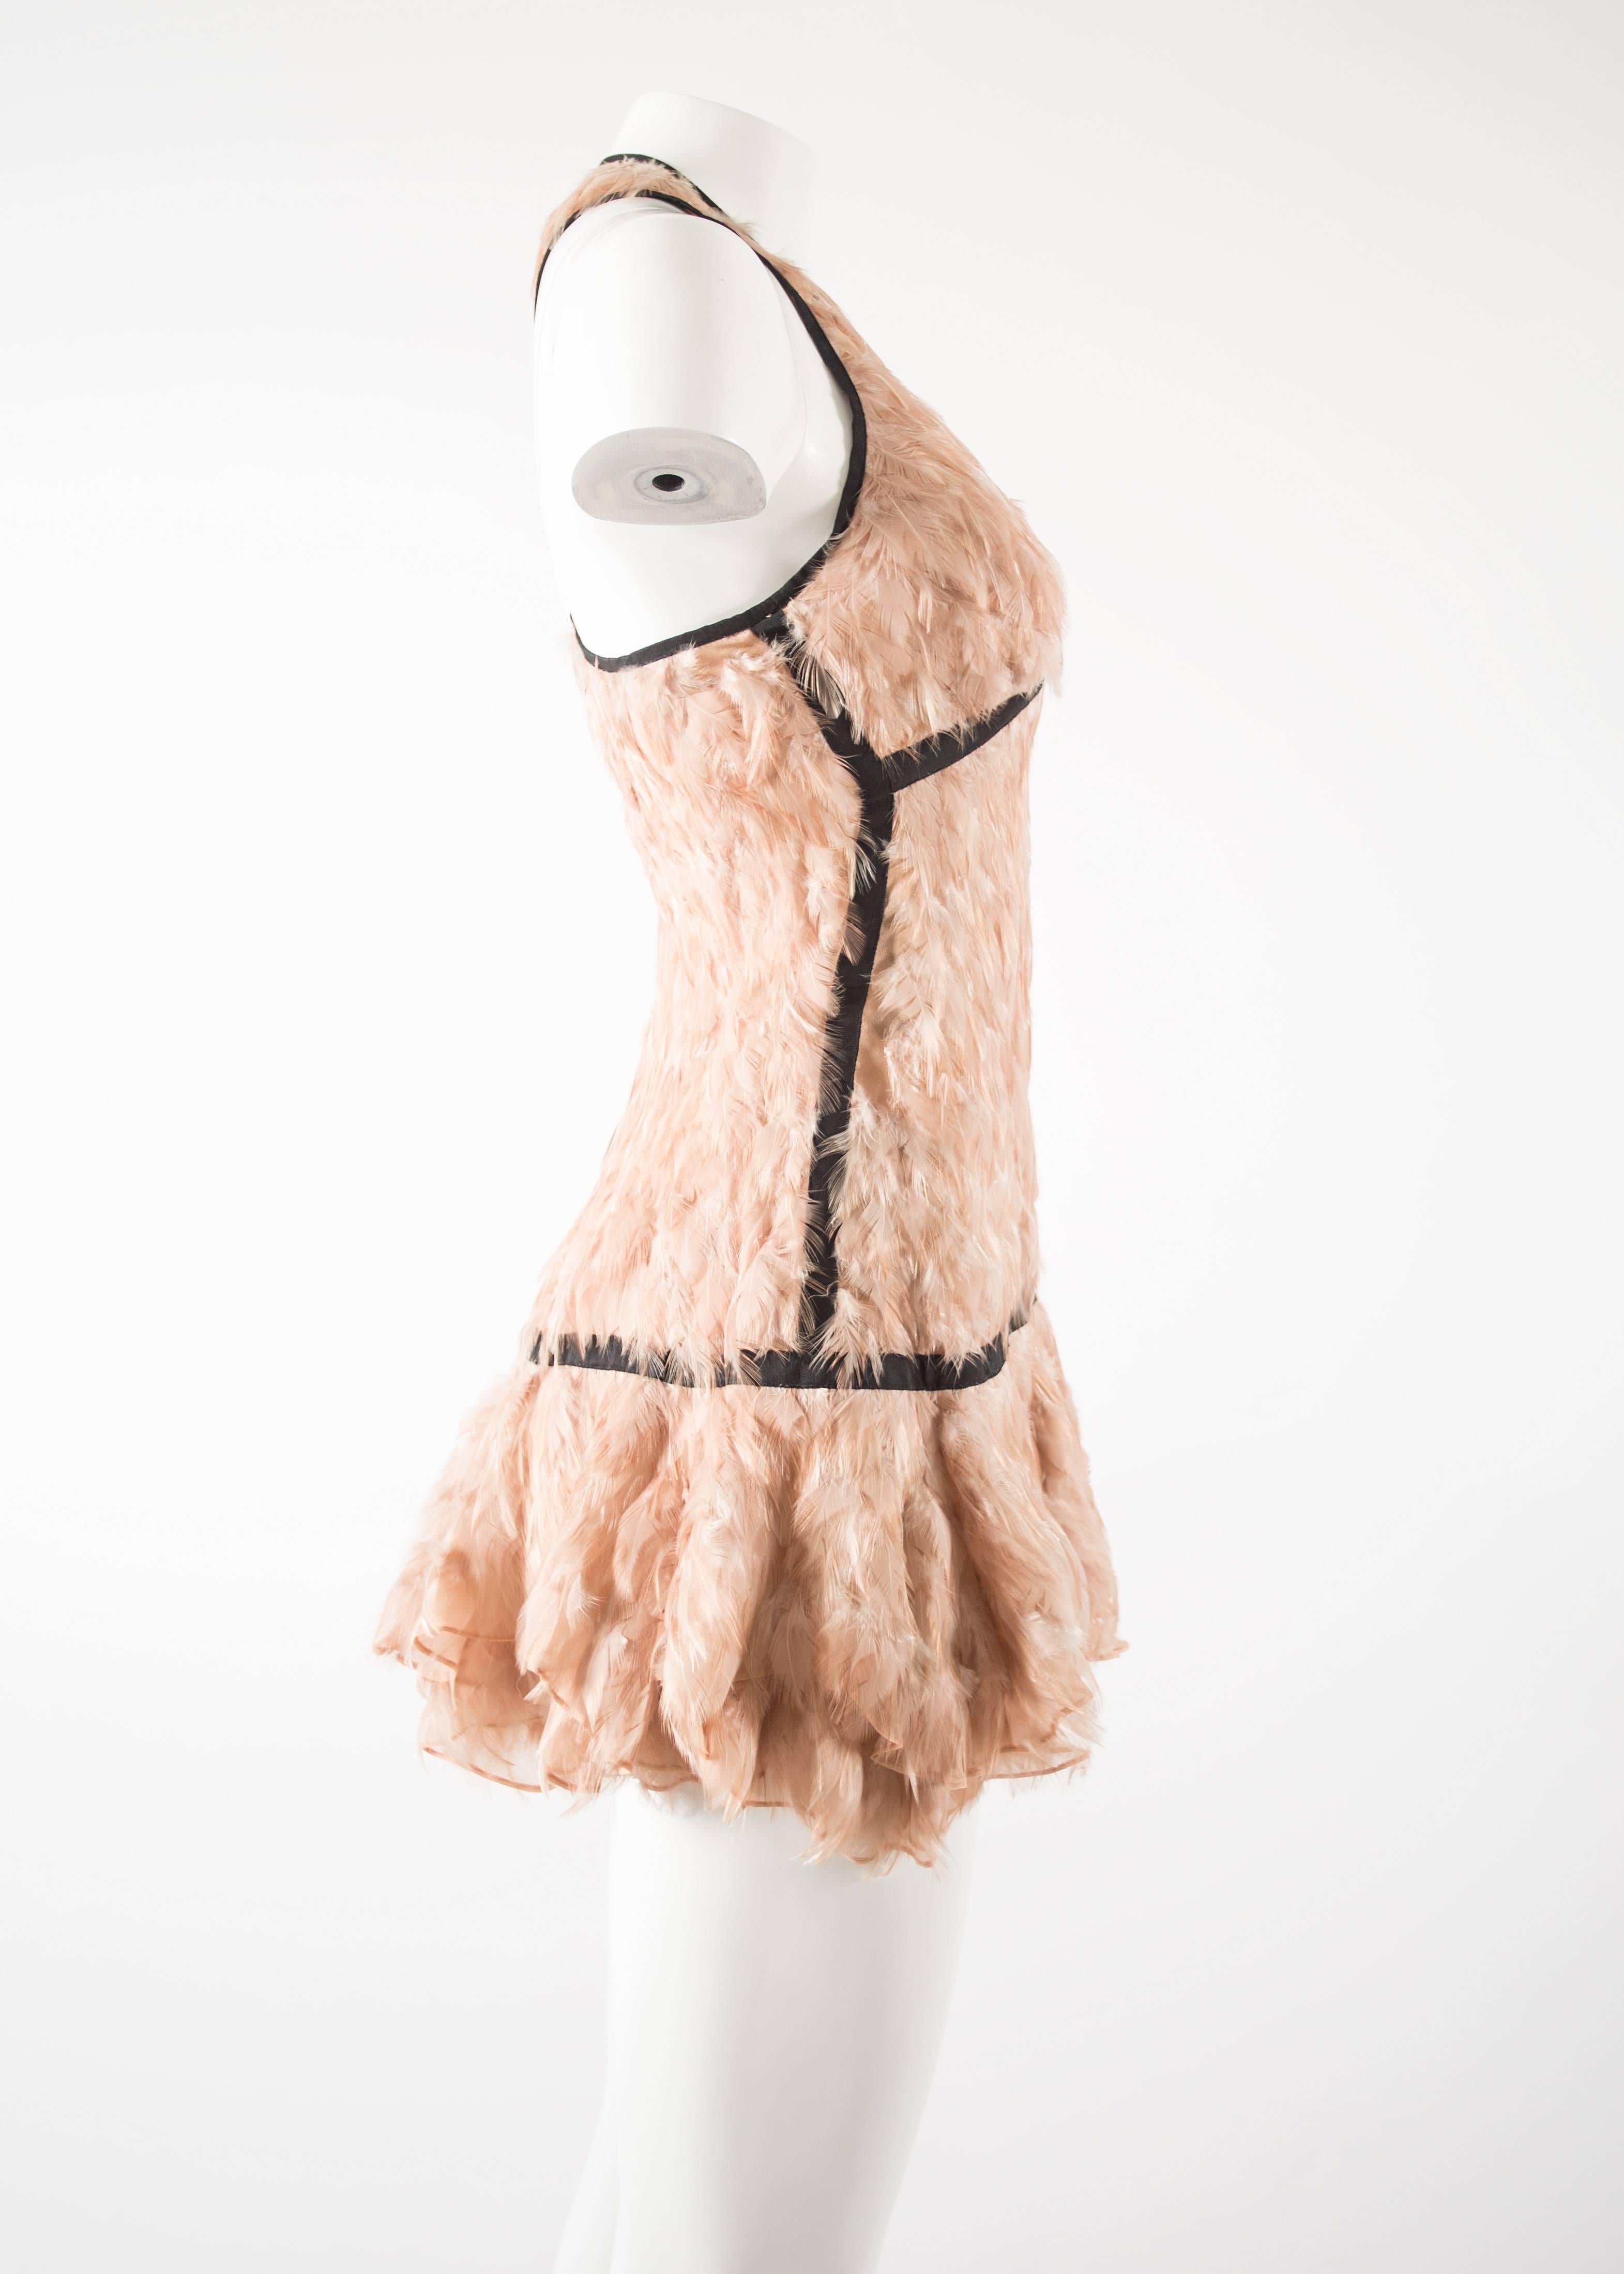 Tom For for Gucci Spring-Summer 2003 pale pink feather mini dress 1